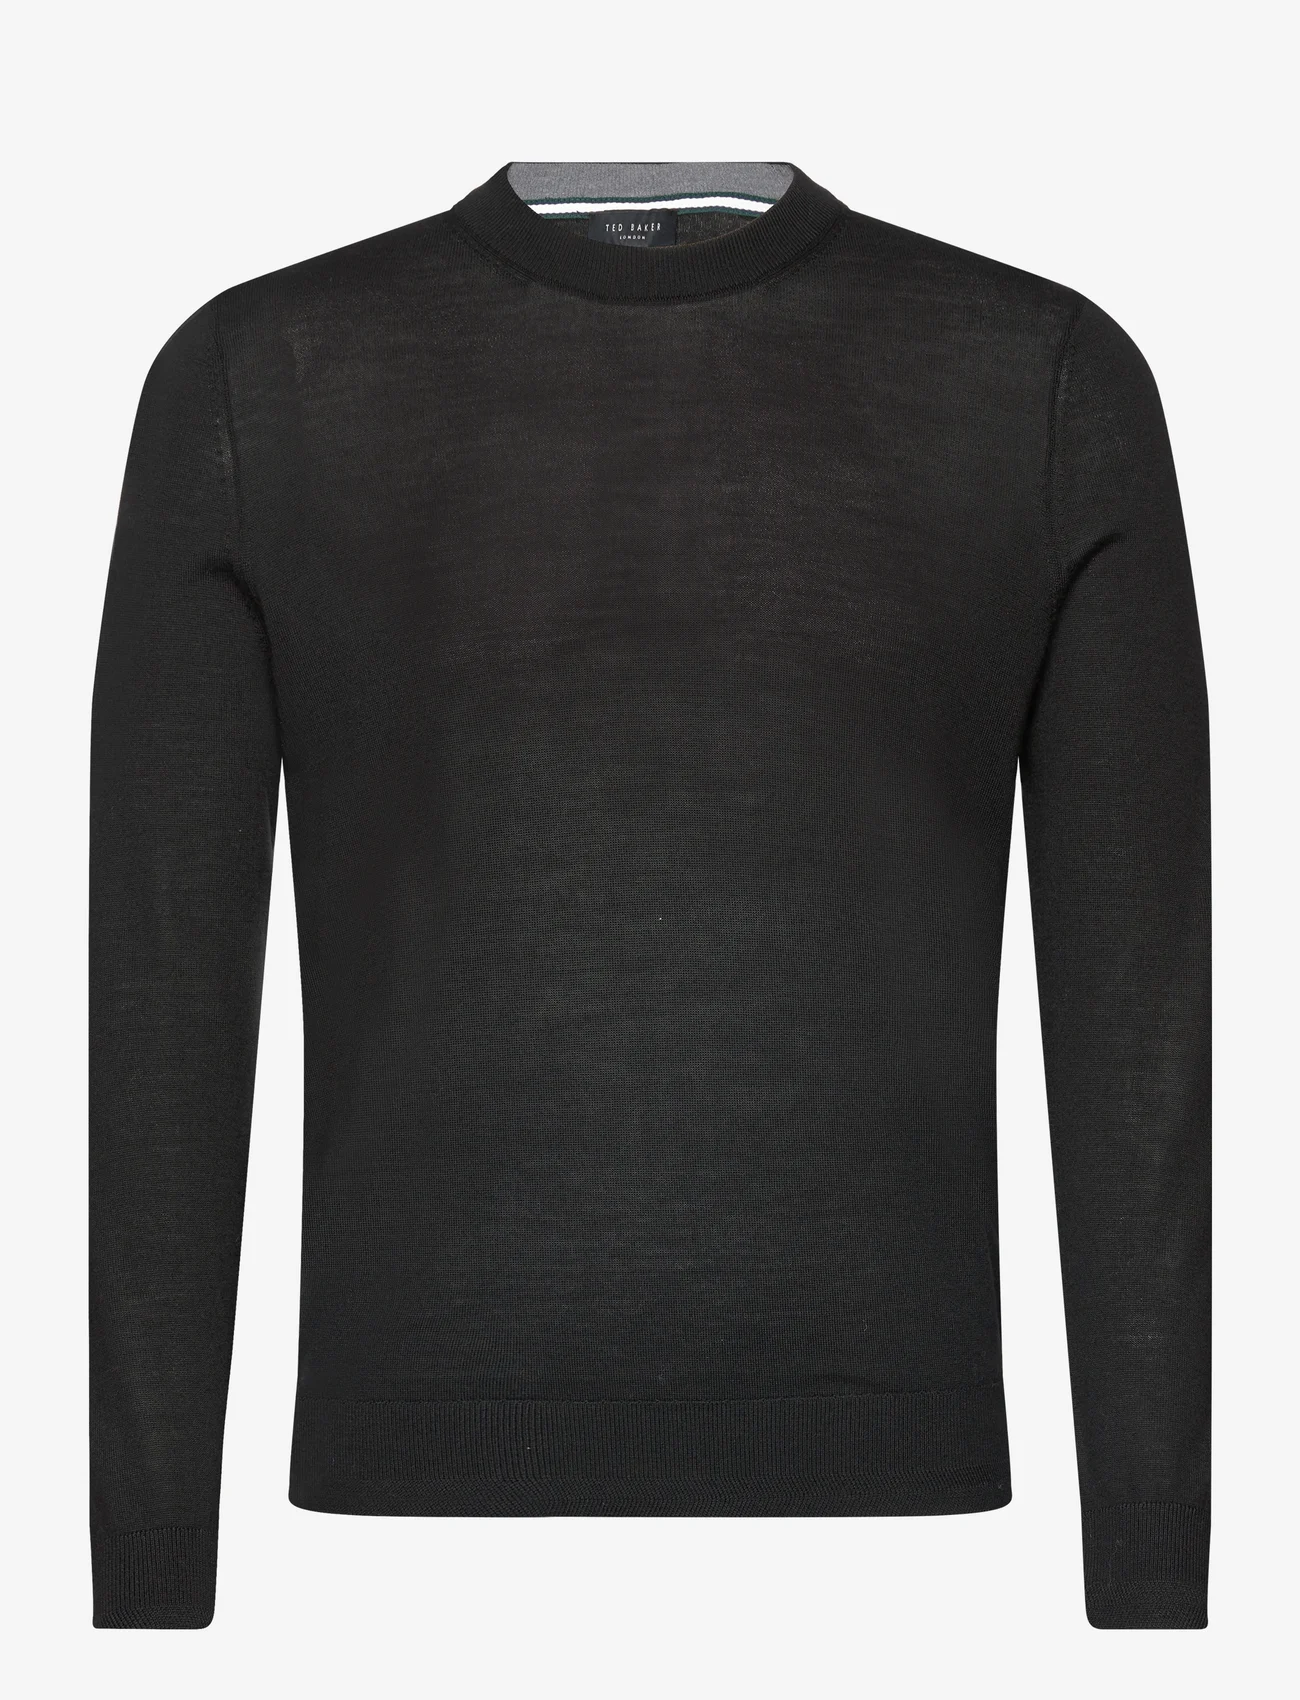 Ted Baker London - CARNBY - knitted round necks - 00 black - 0